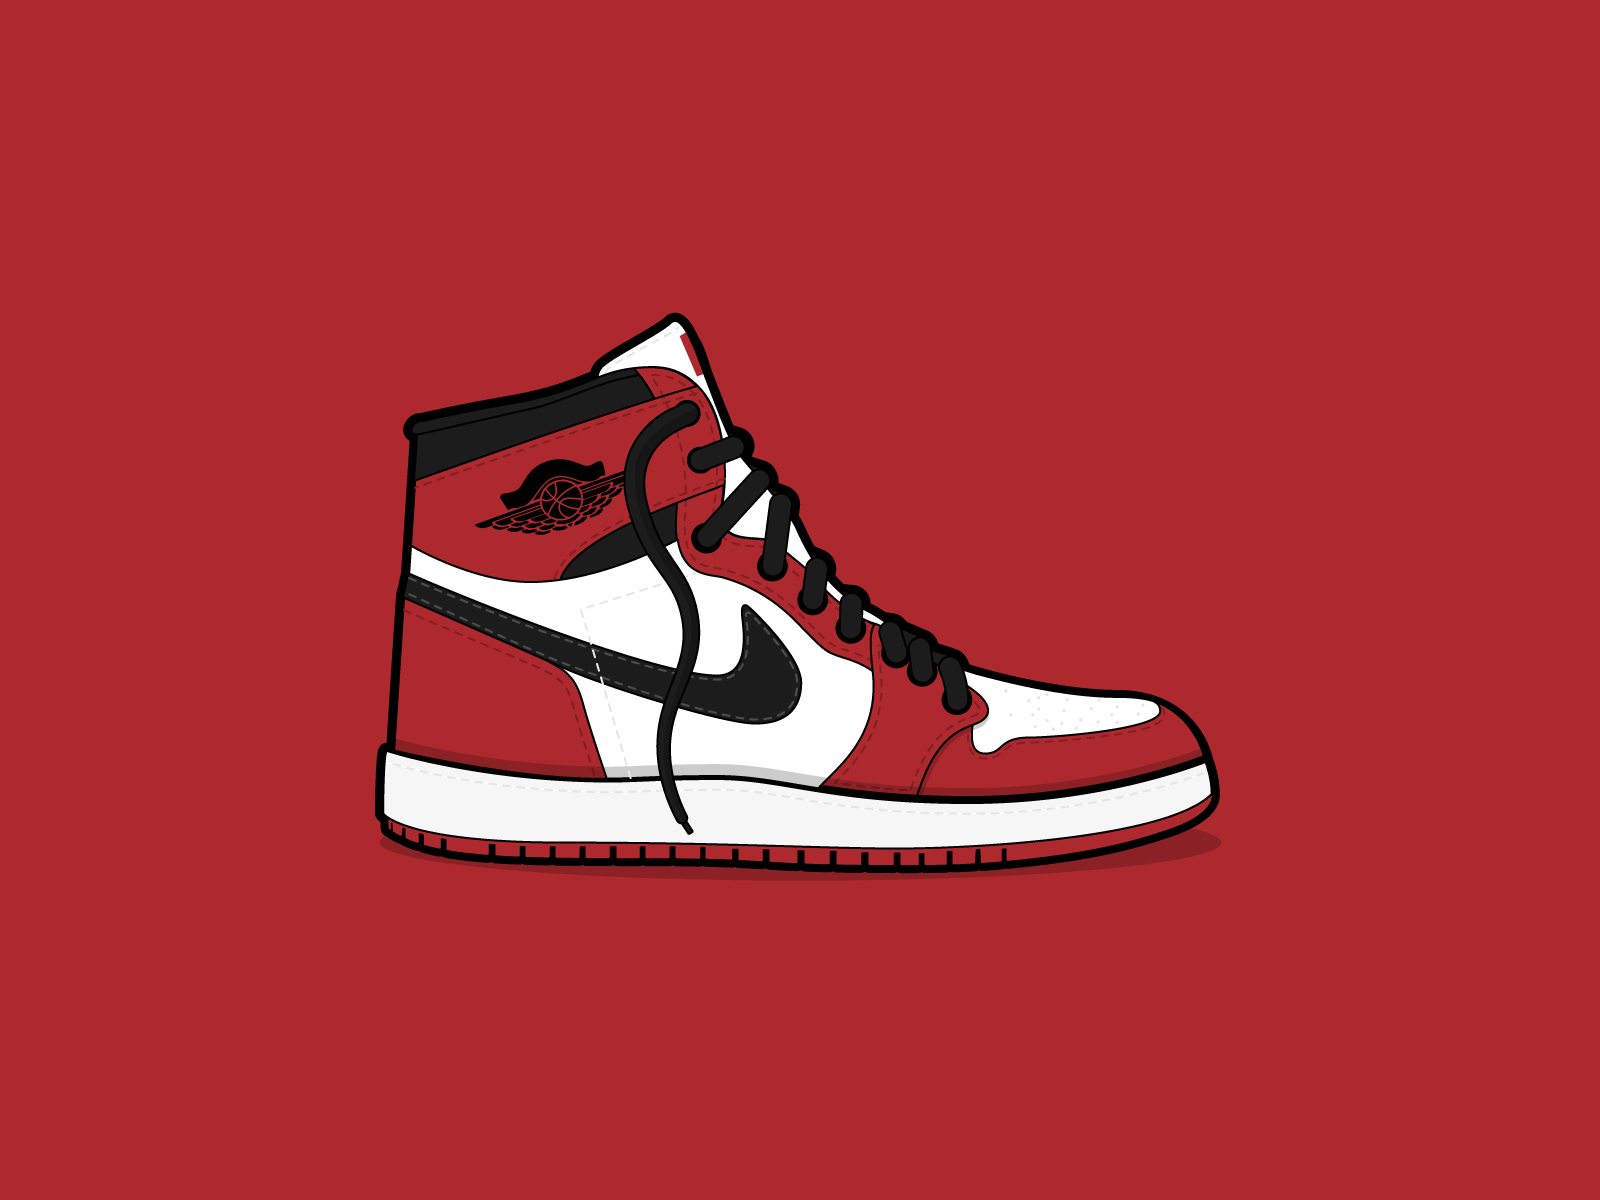 Chicago Jordan 1s by Grant Fisher on Dribbble